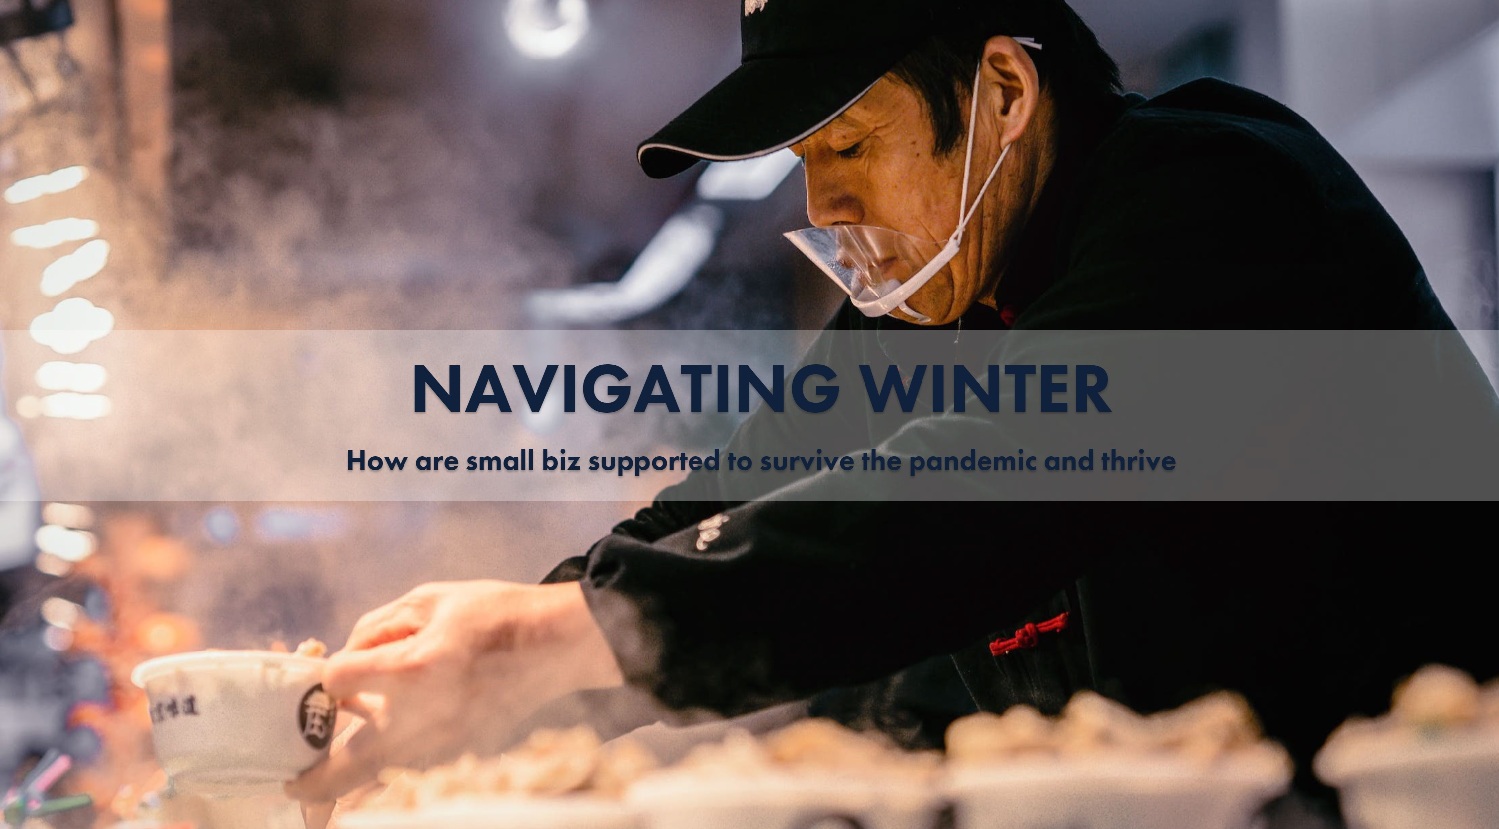 Navigating winter: How are small biz supported to survive the pandemic and thrive?